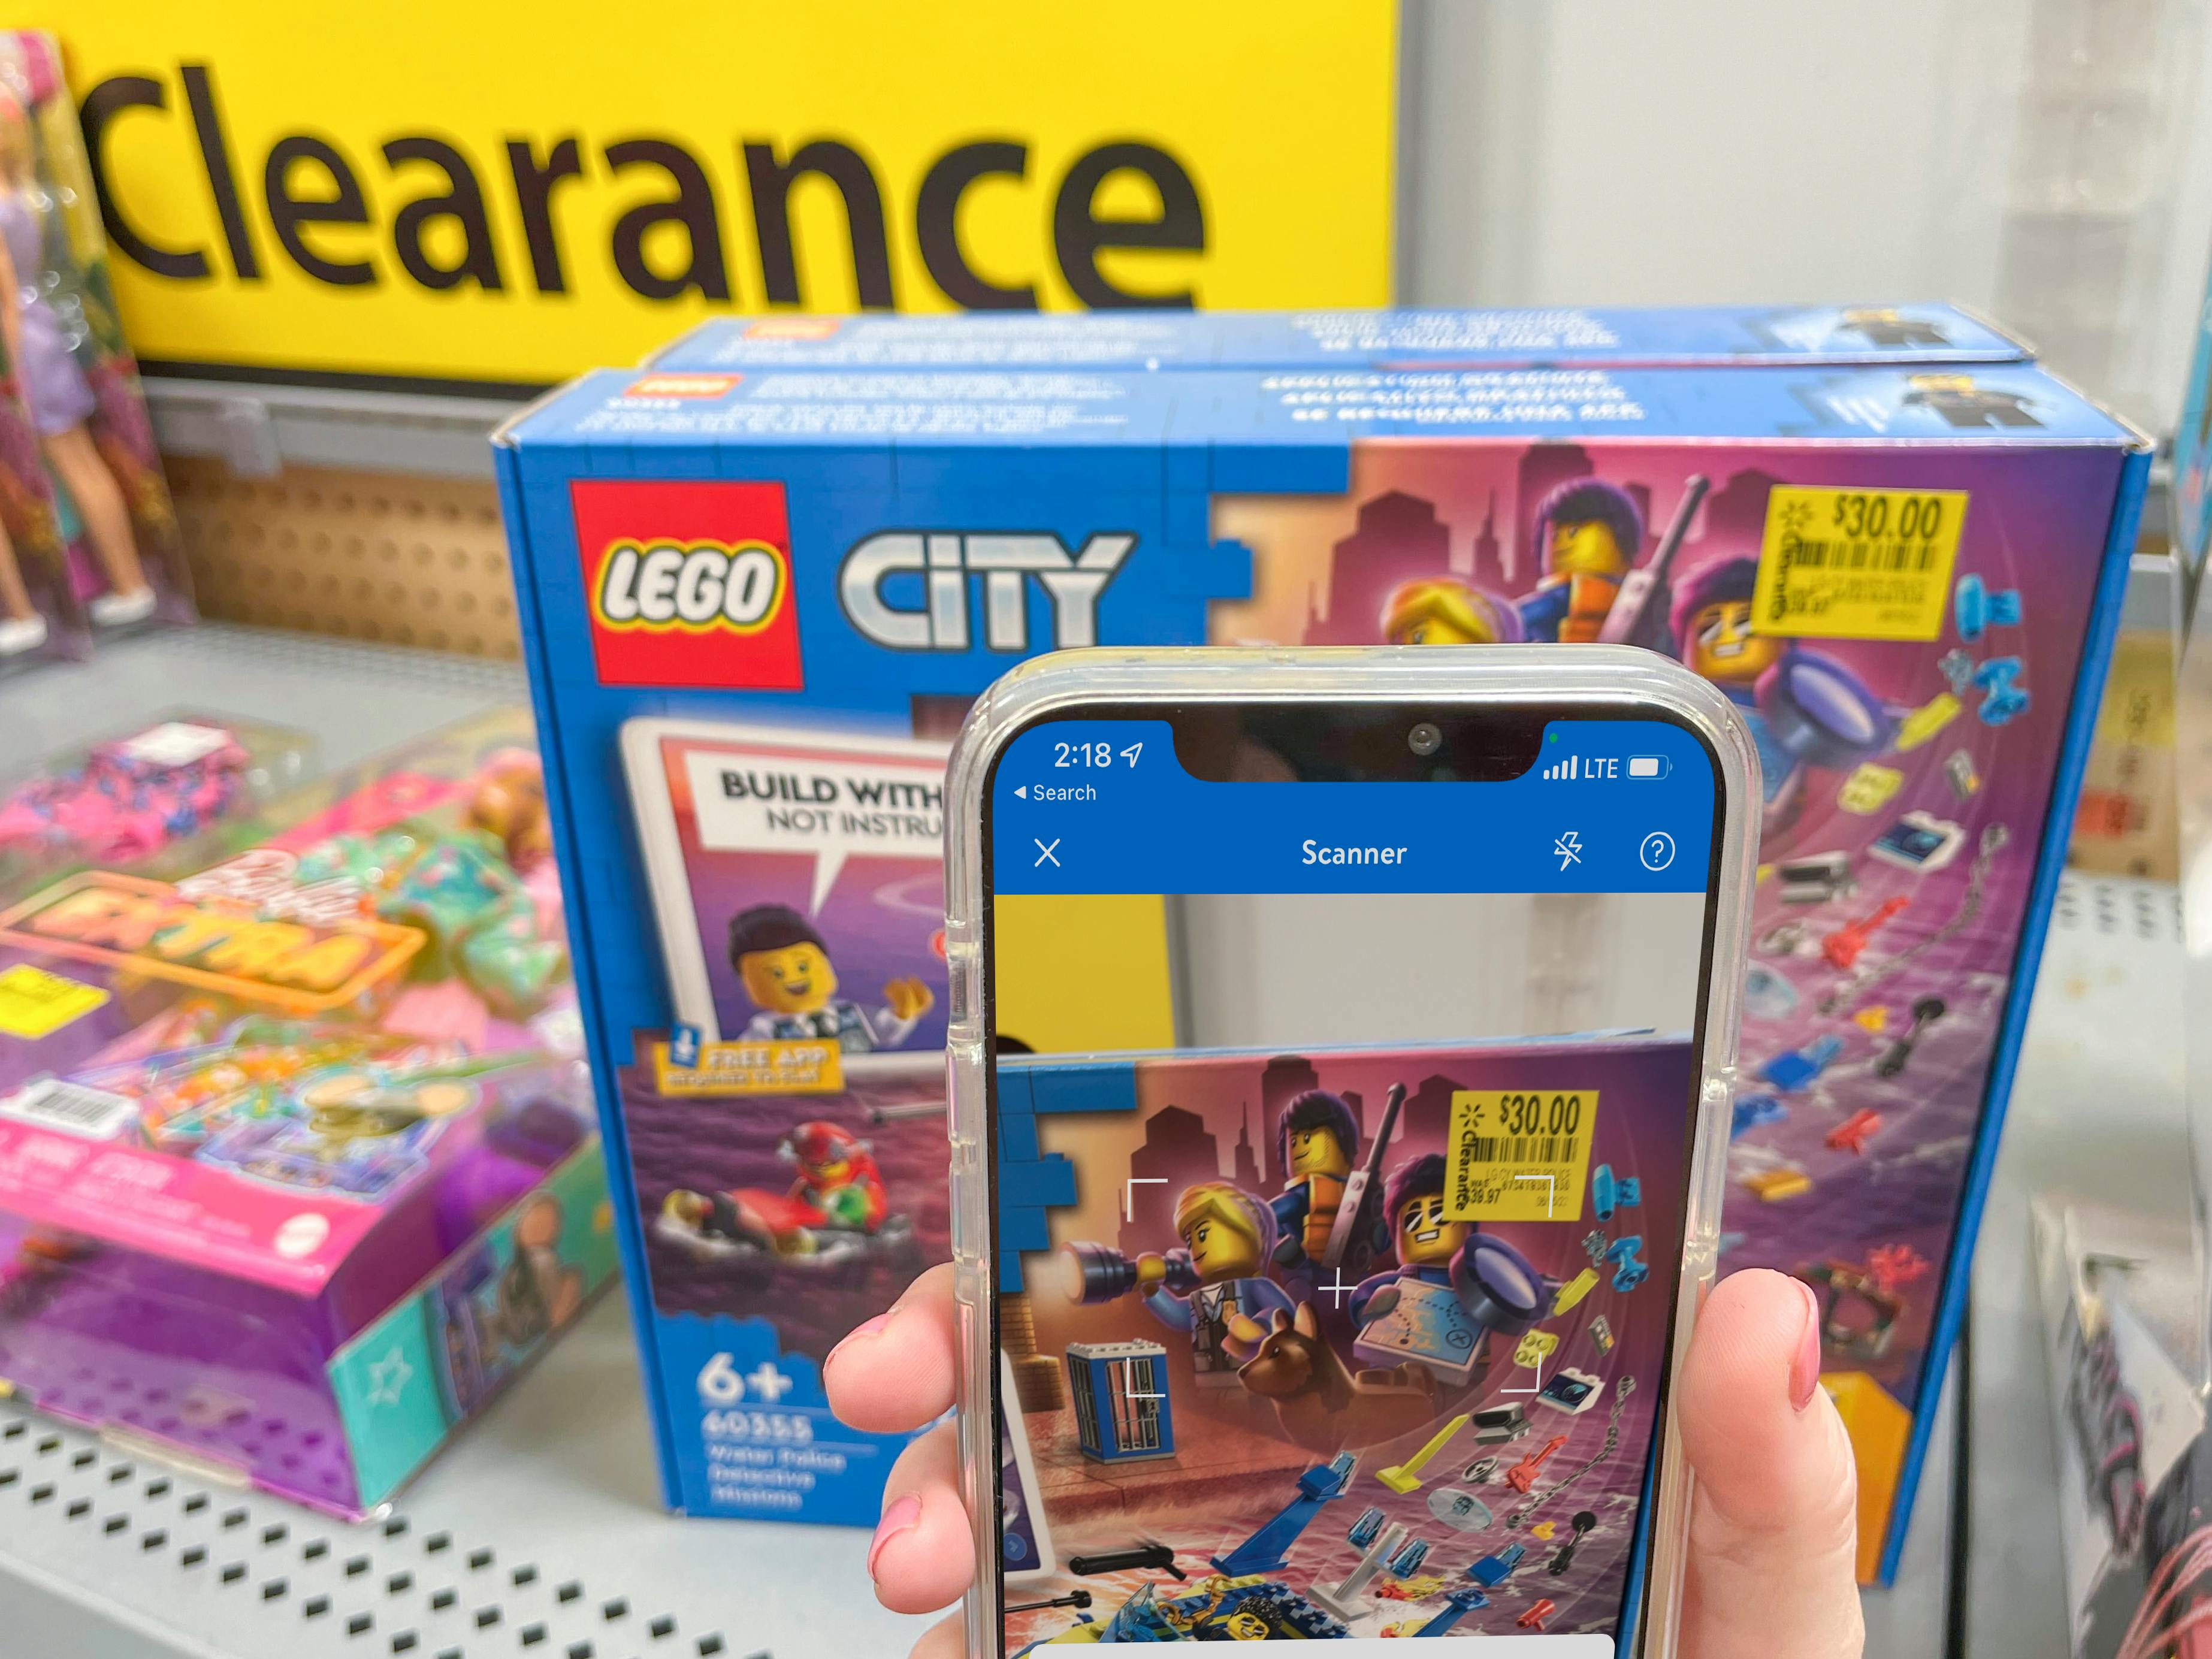 A person's hand holding up their cellphone, using the Walmart app to scan the price of a toy on a clearance shelf.